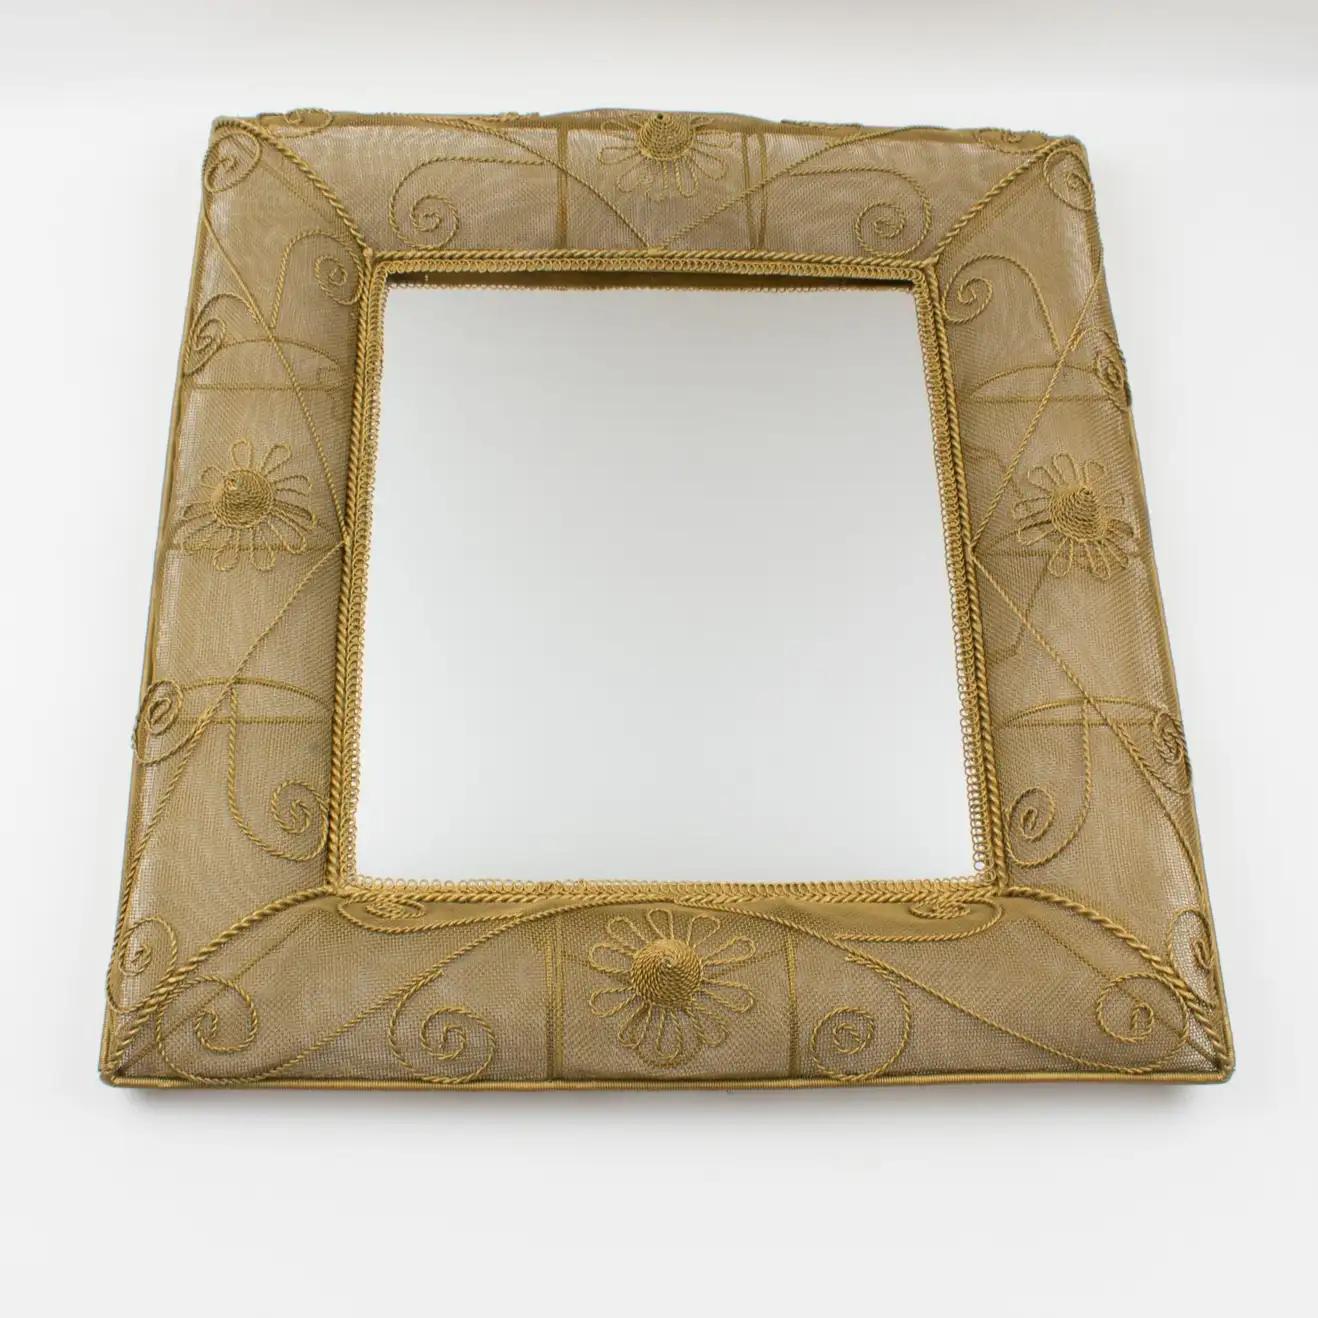 Modern Gilt Metal Wire Mesh Wall Mirror with Floral Decor, 1950s For Sale